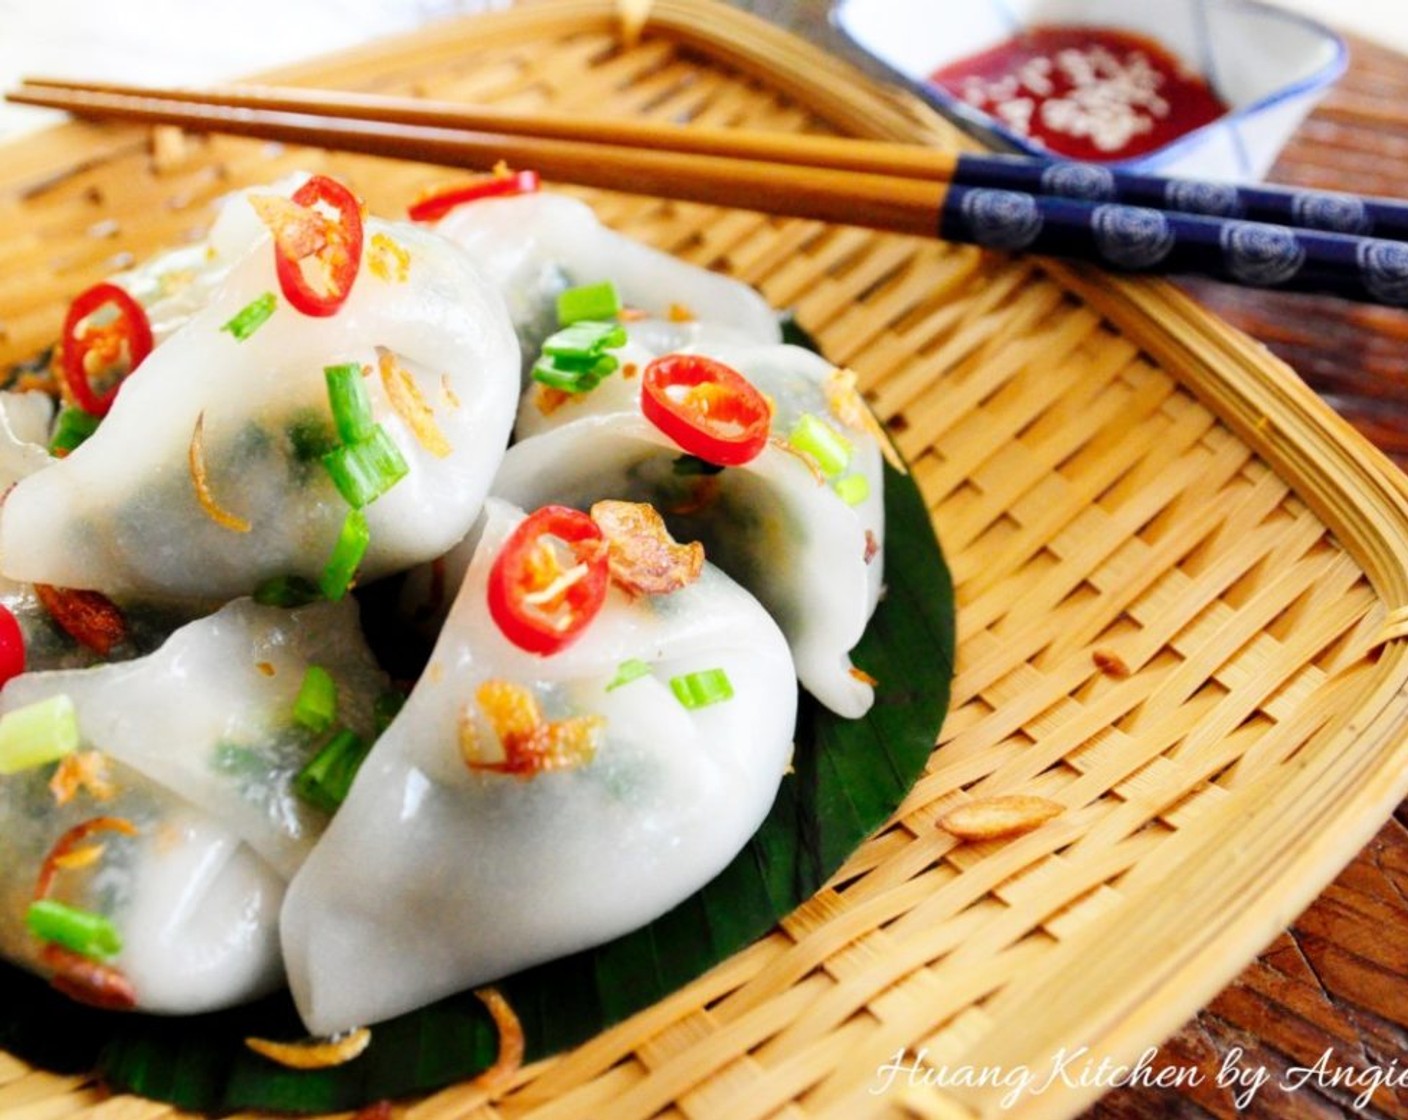 step 30 These chive dumplings are best eaten fresh served with sweet chili sauce. Enjoy!